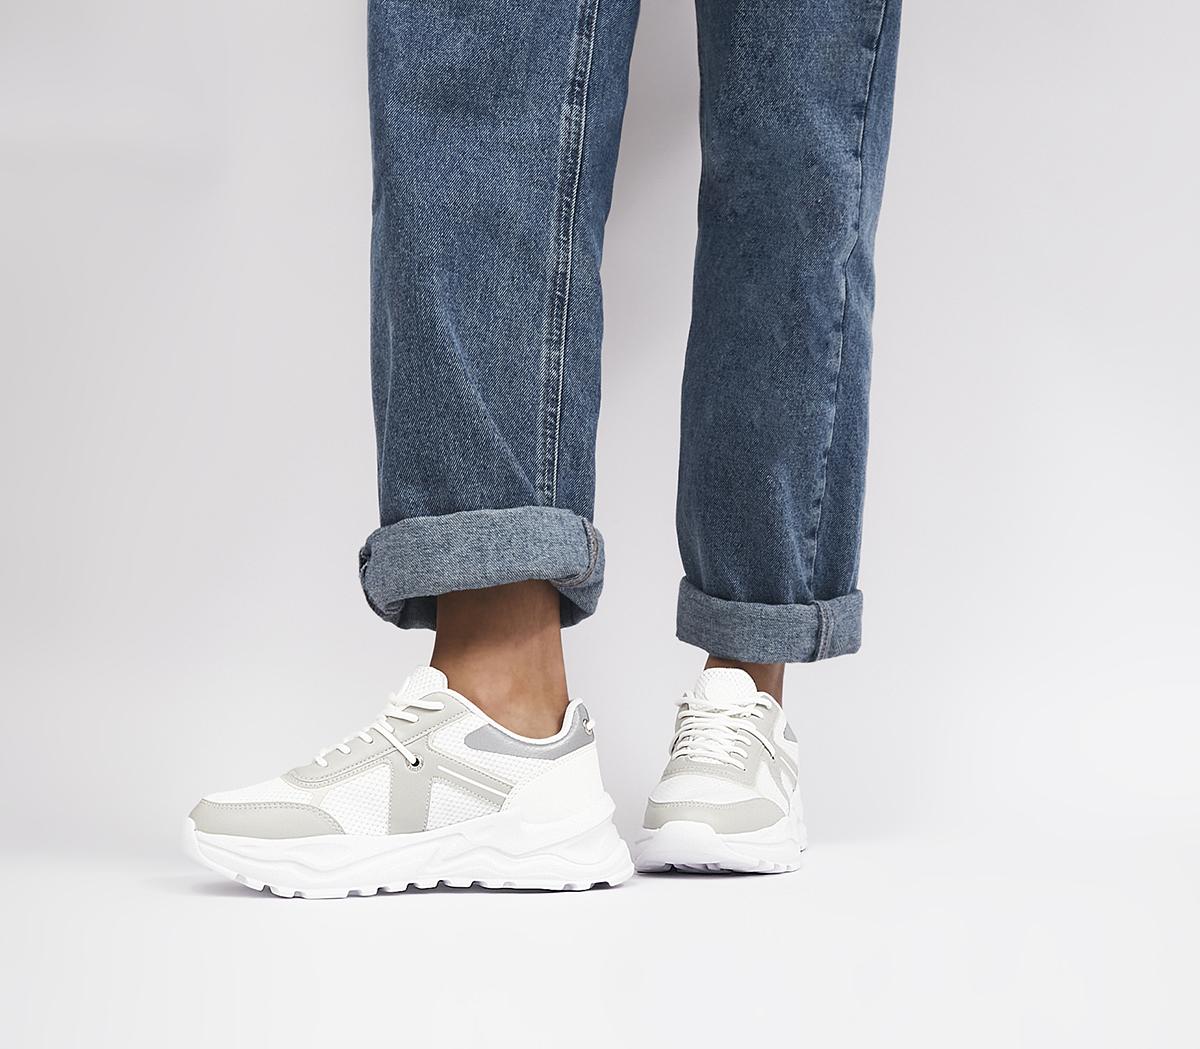 OFFICEFuturistic Chunky Lace Up TrainersWhite Mix